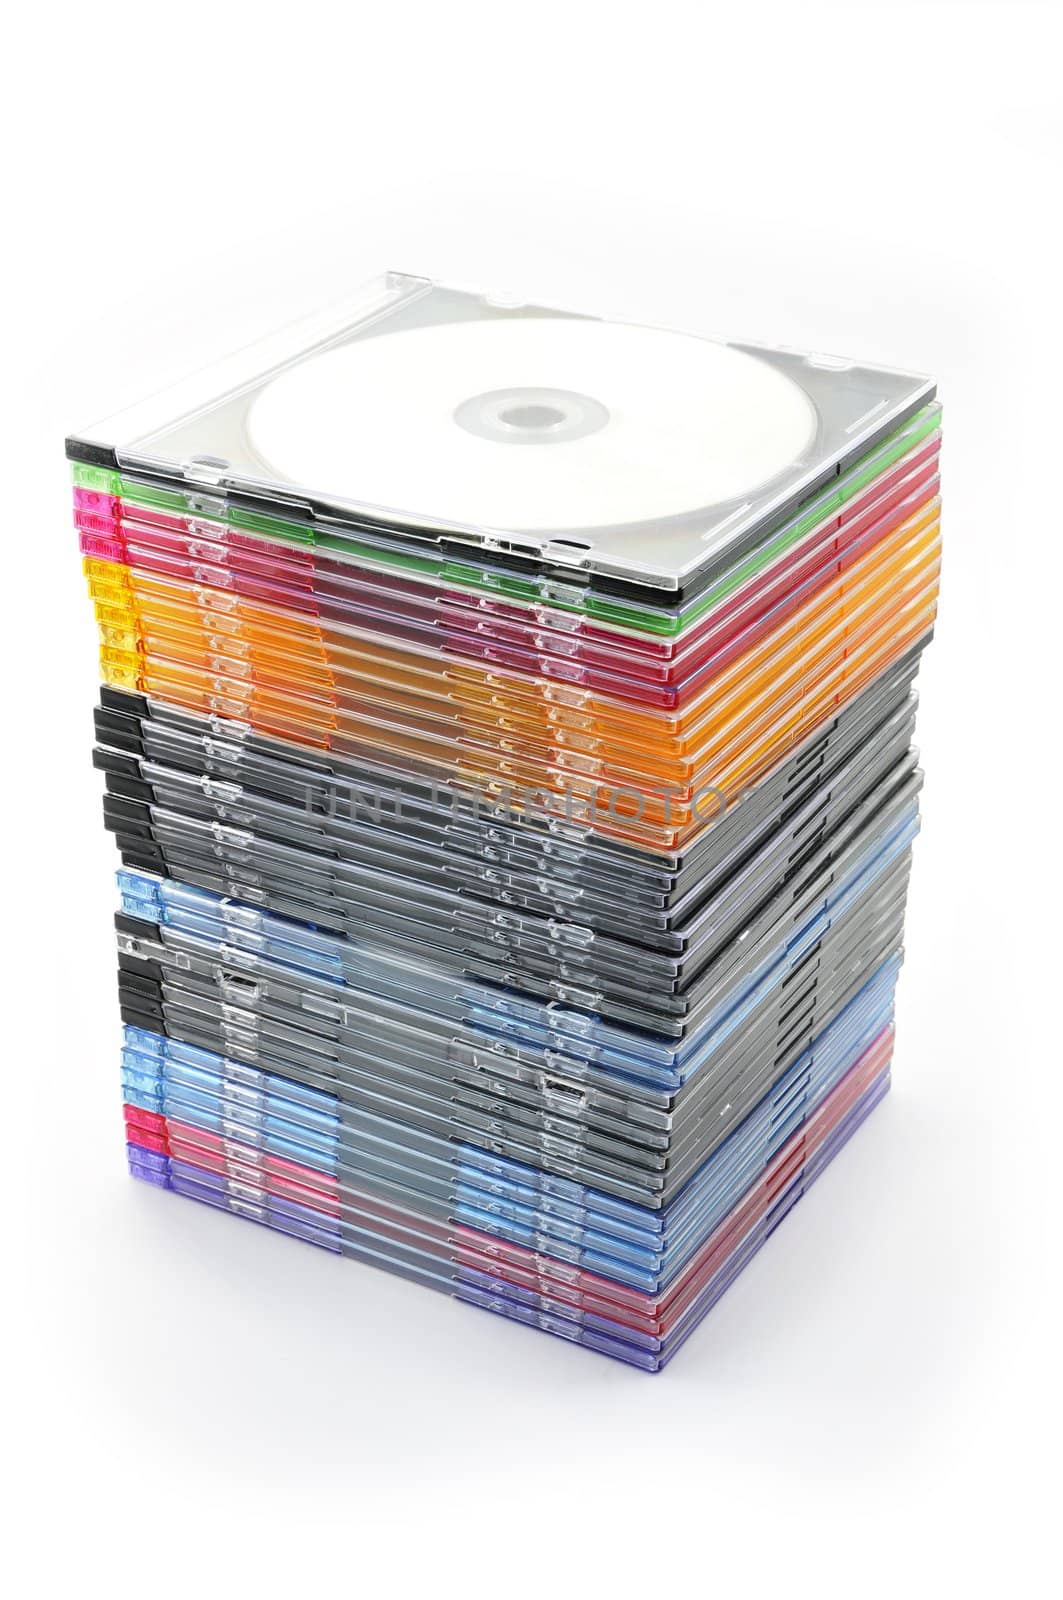 Multi-colored dvd slim box stacked on a white background